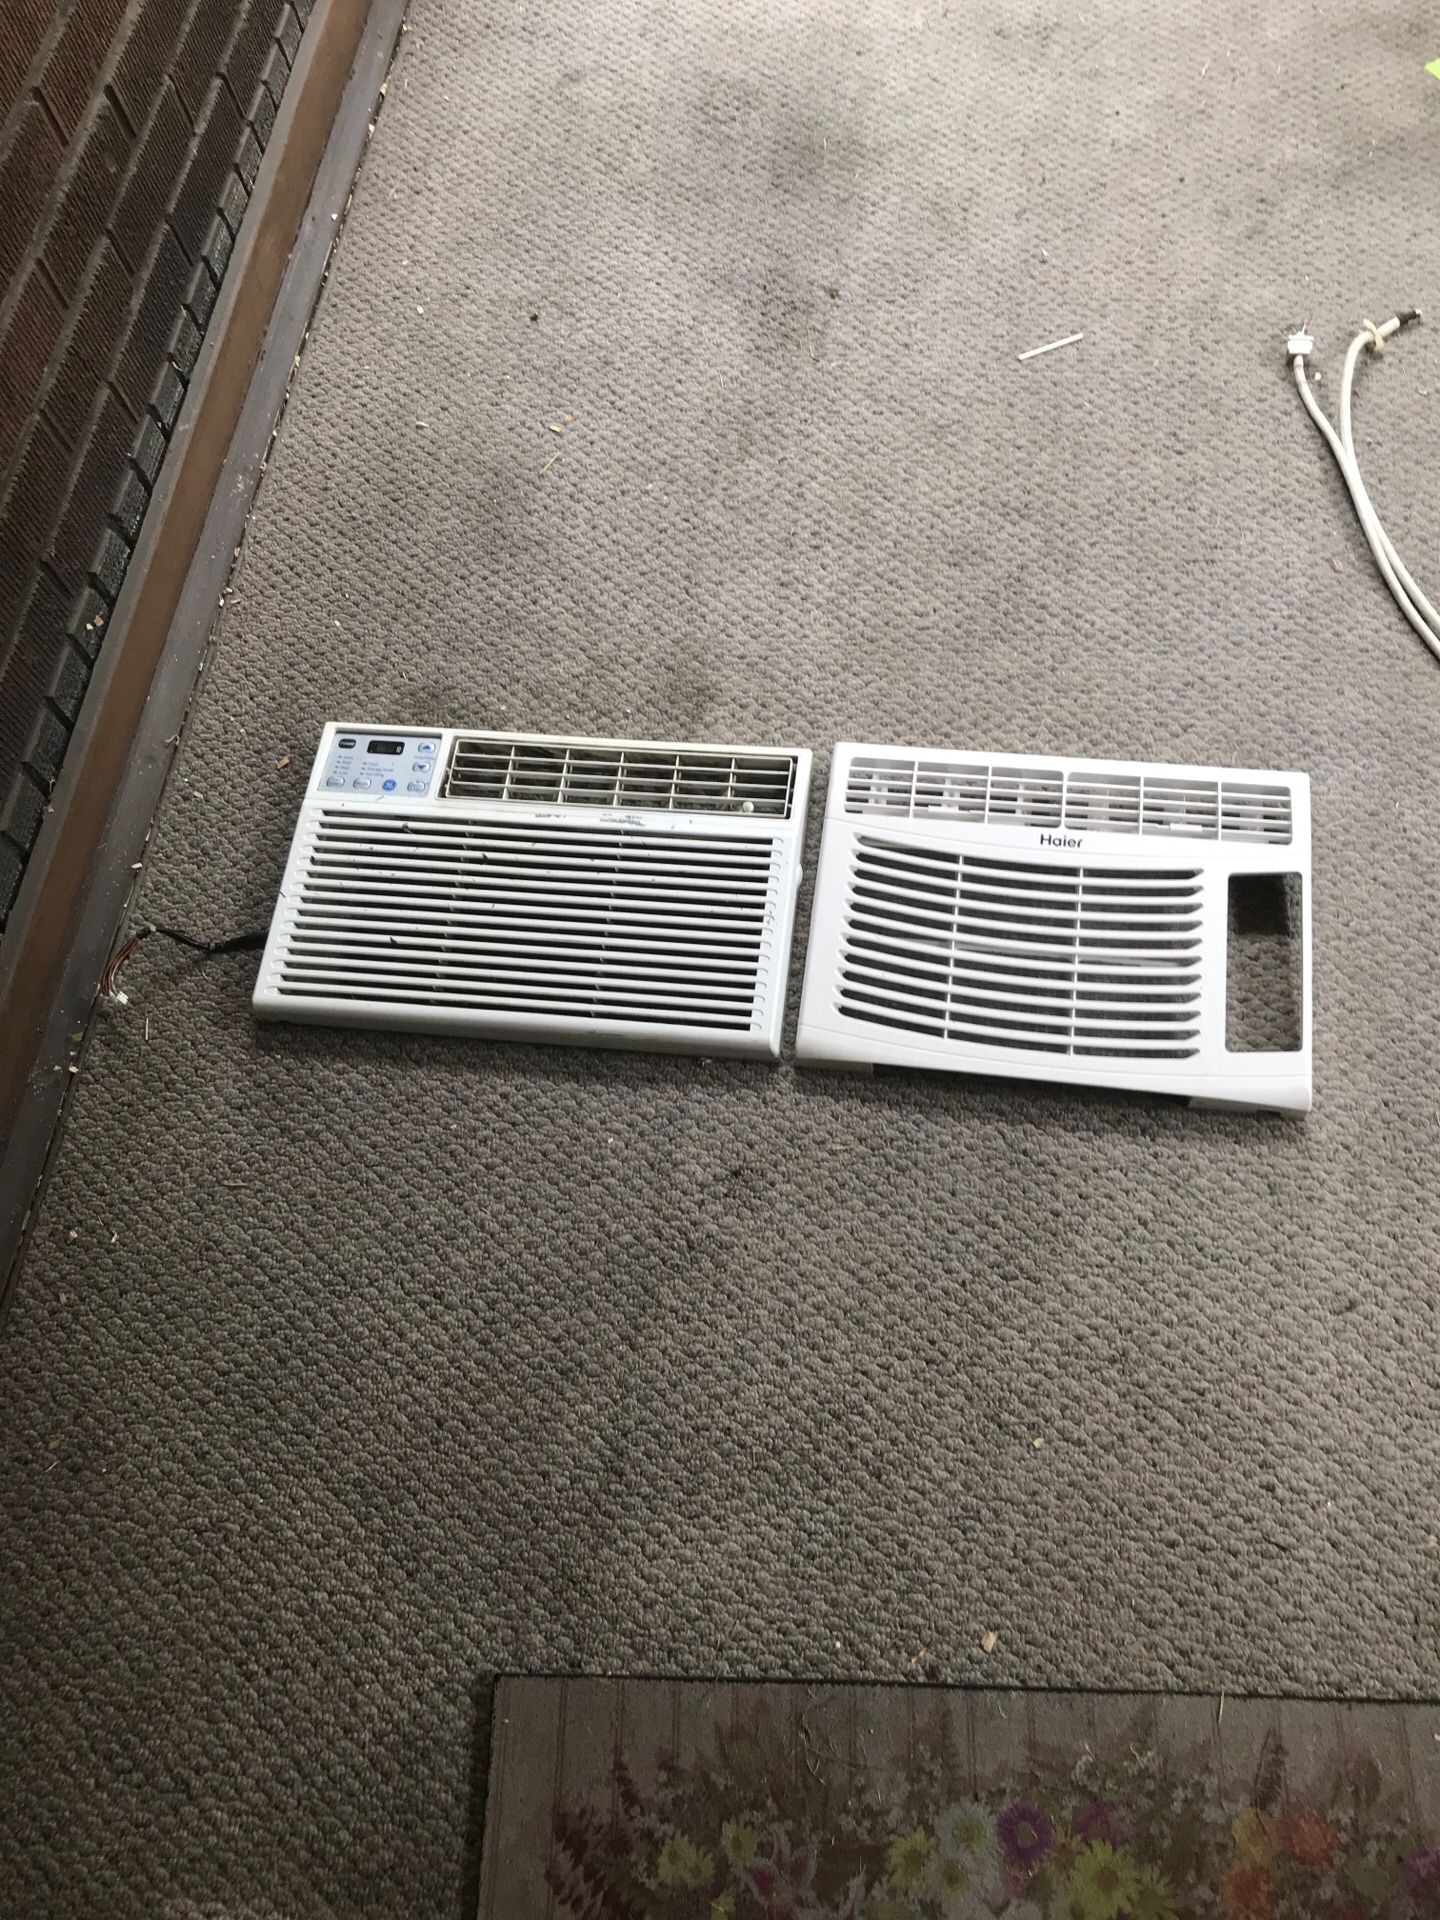 Window ac parts, may need cleaned, otherwise good condition!